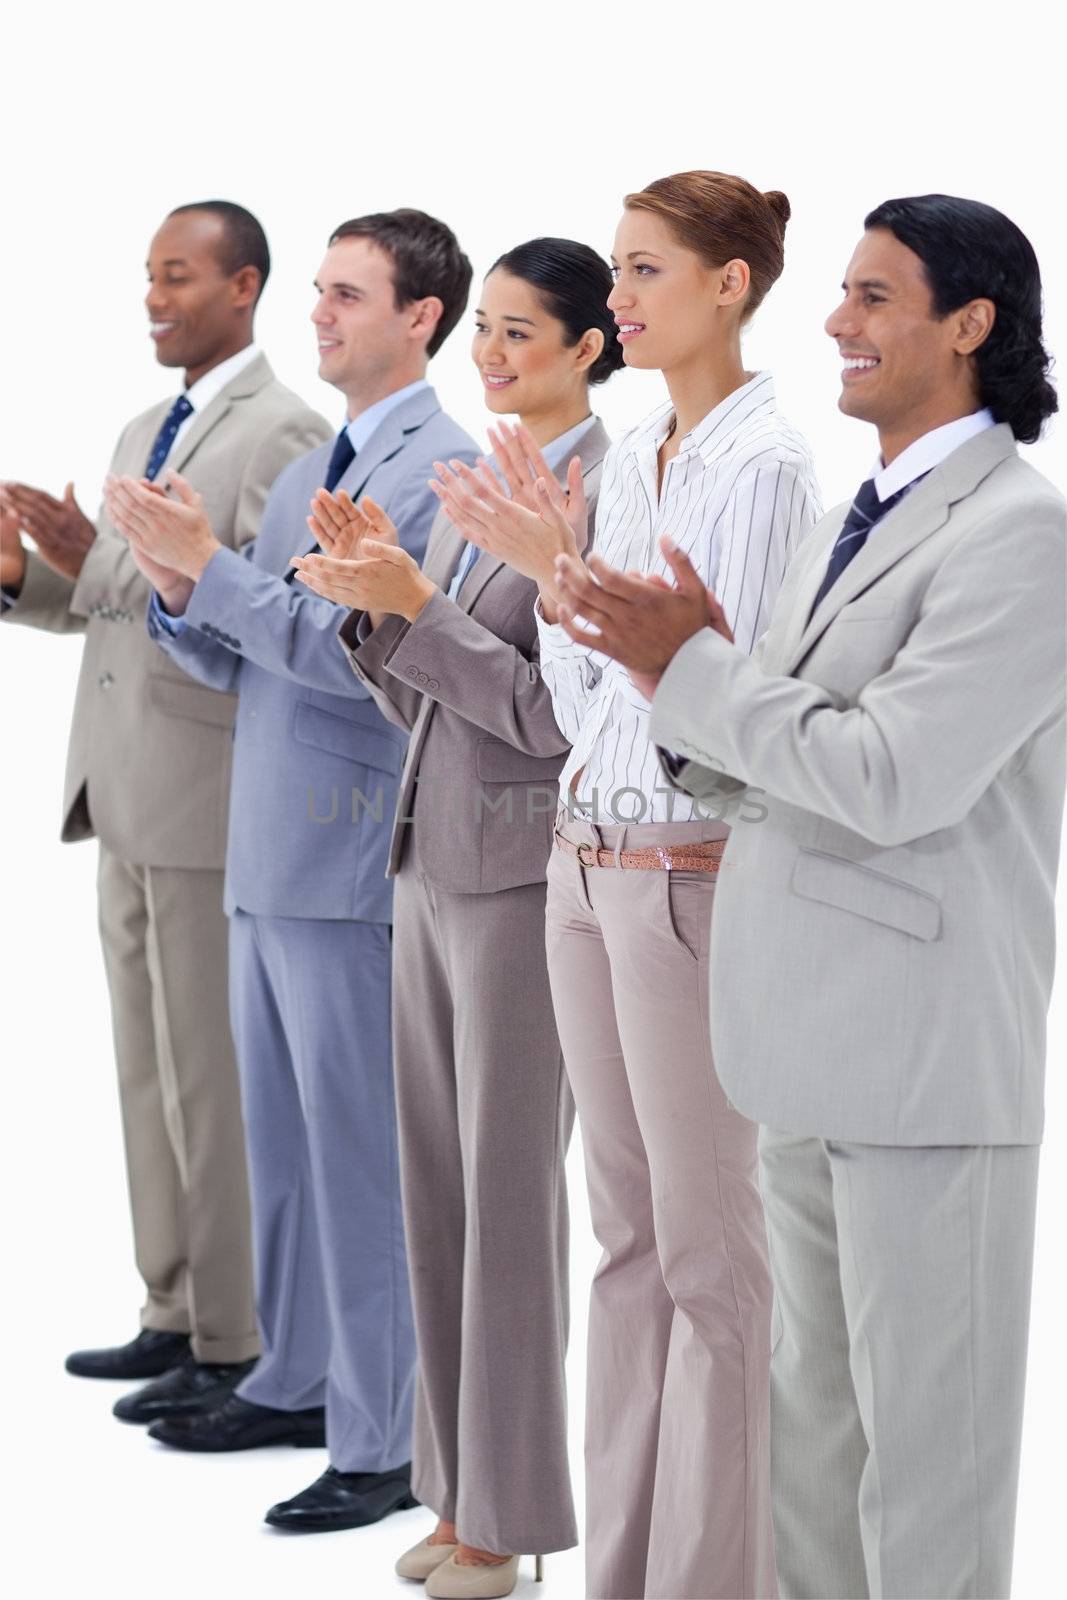 Business people smiling and applauding while looking towards the left side against white background